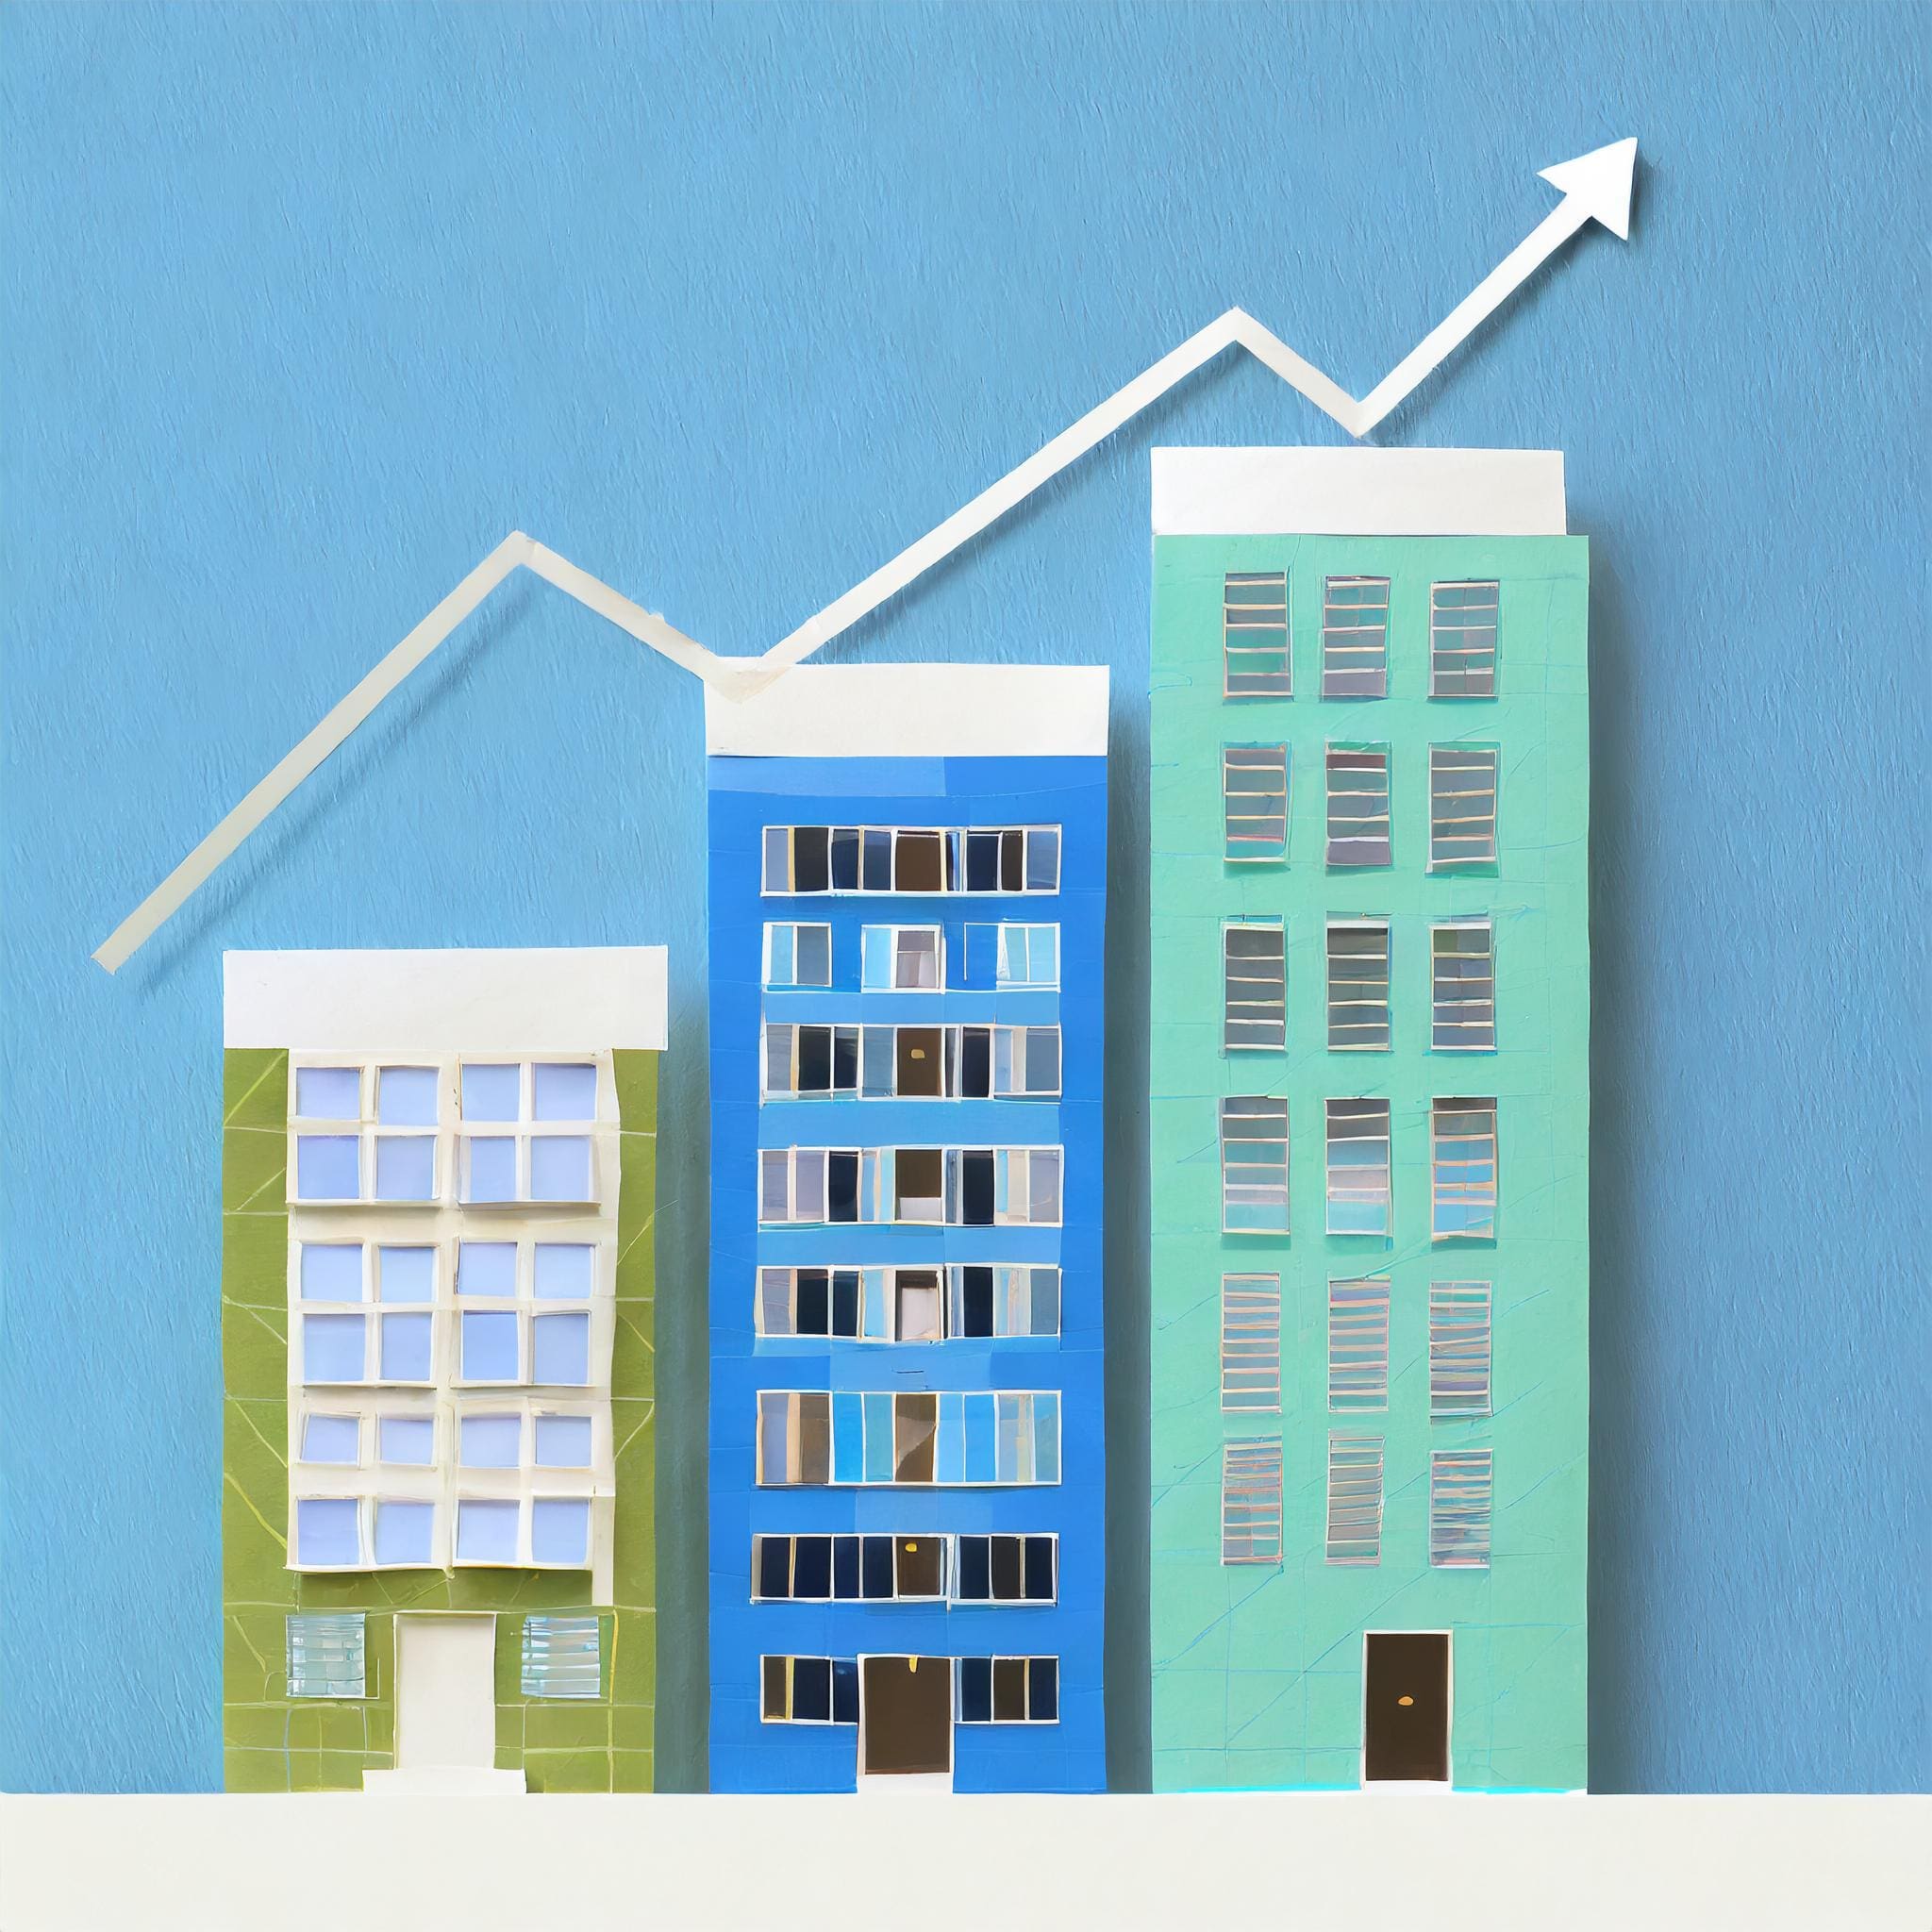 Illustration of Multifamily growth through periodic rent increases